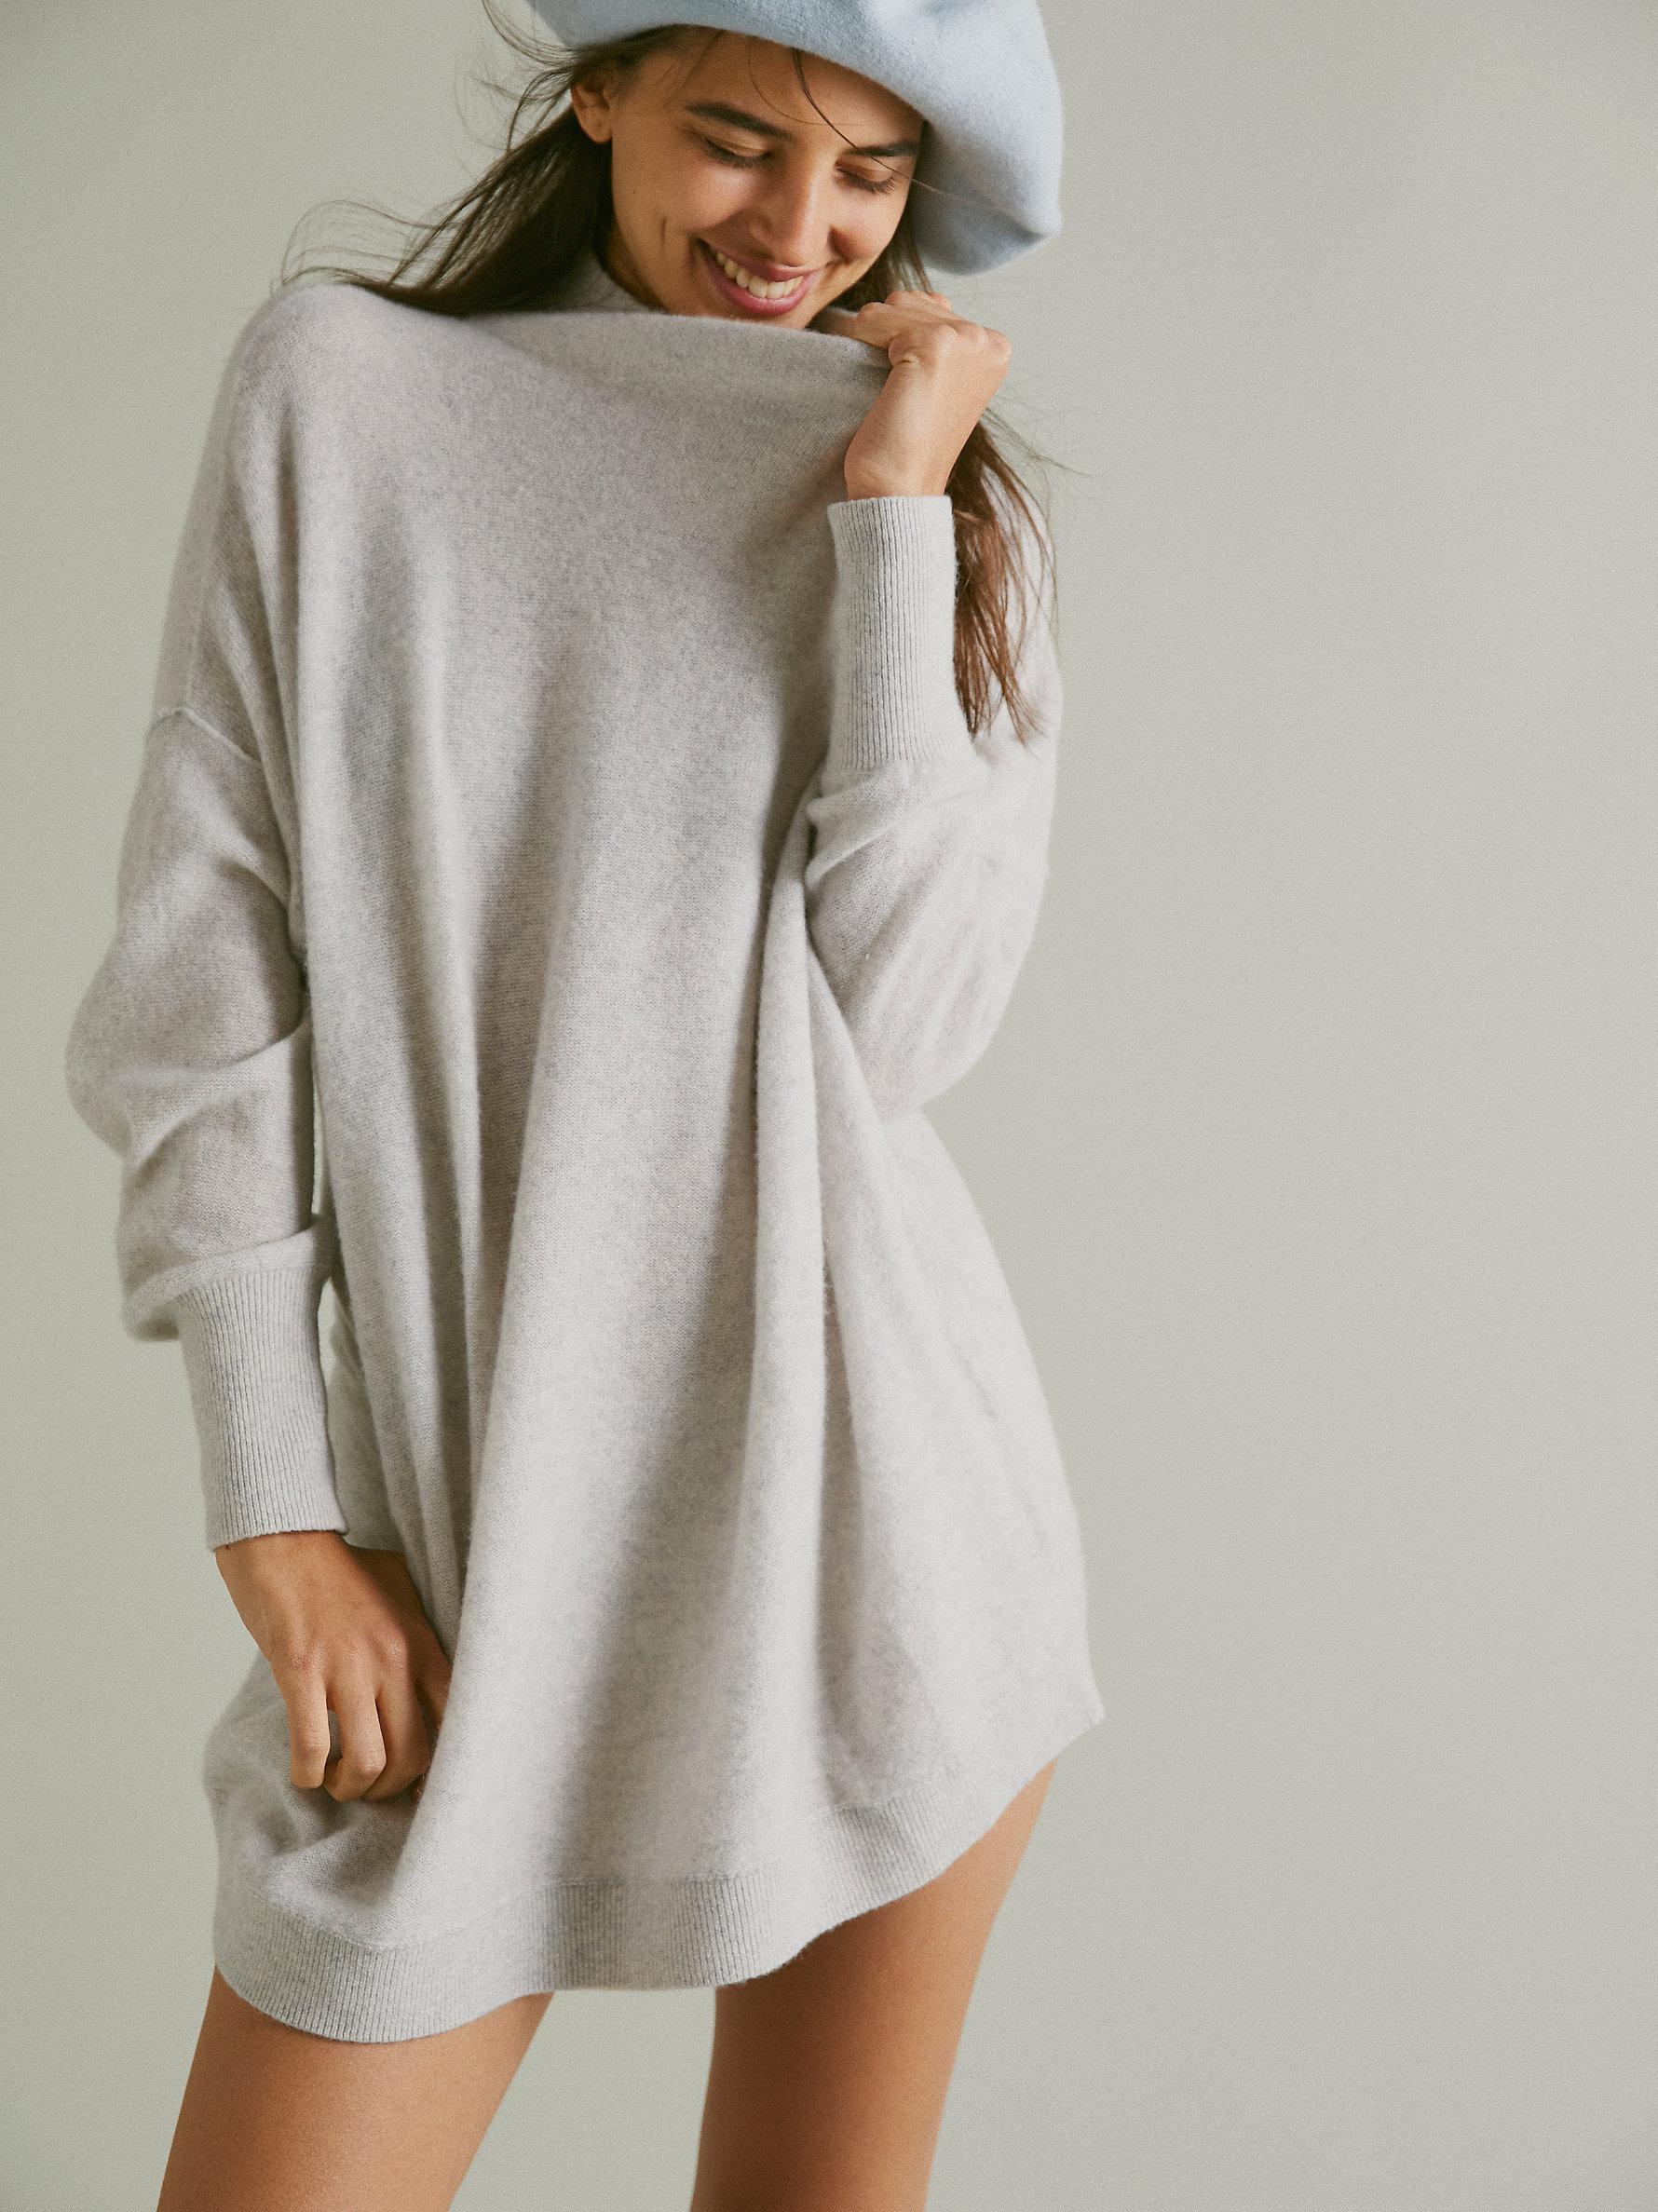 Free People Ottoman Cashmere Tunic in Gray | Lyst